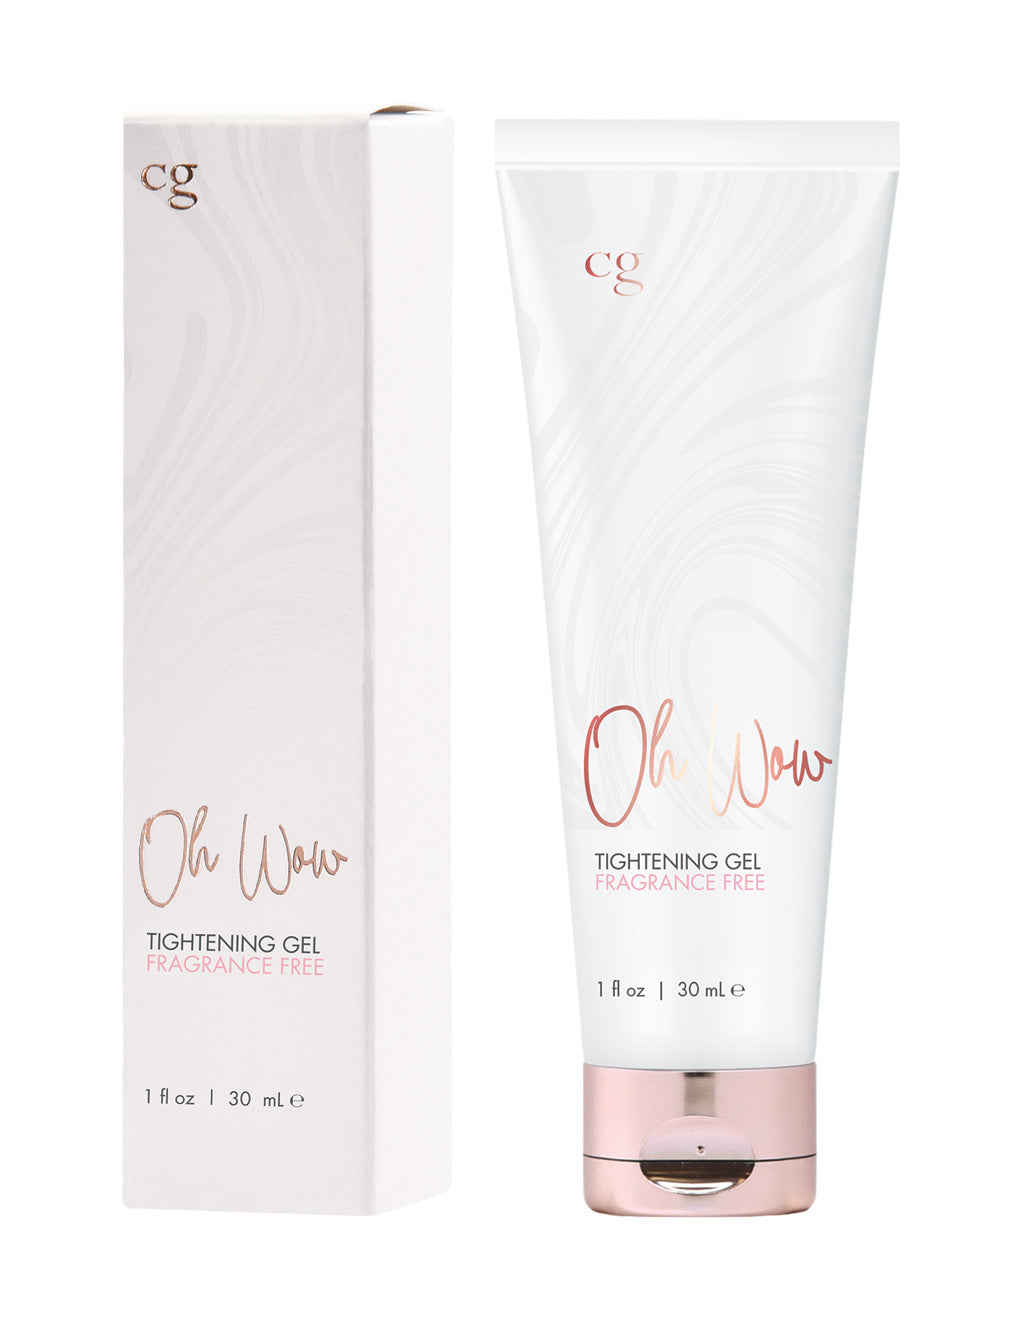 Oh Wow Tightening Gel 1oz Tube And Box